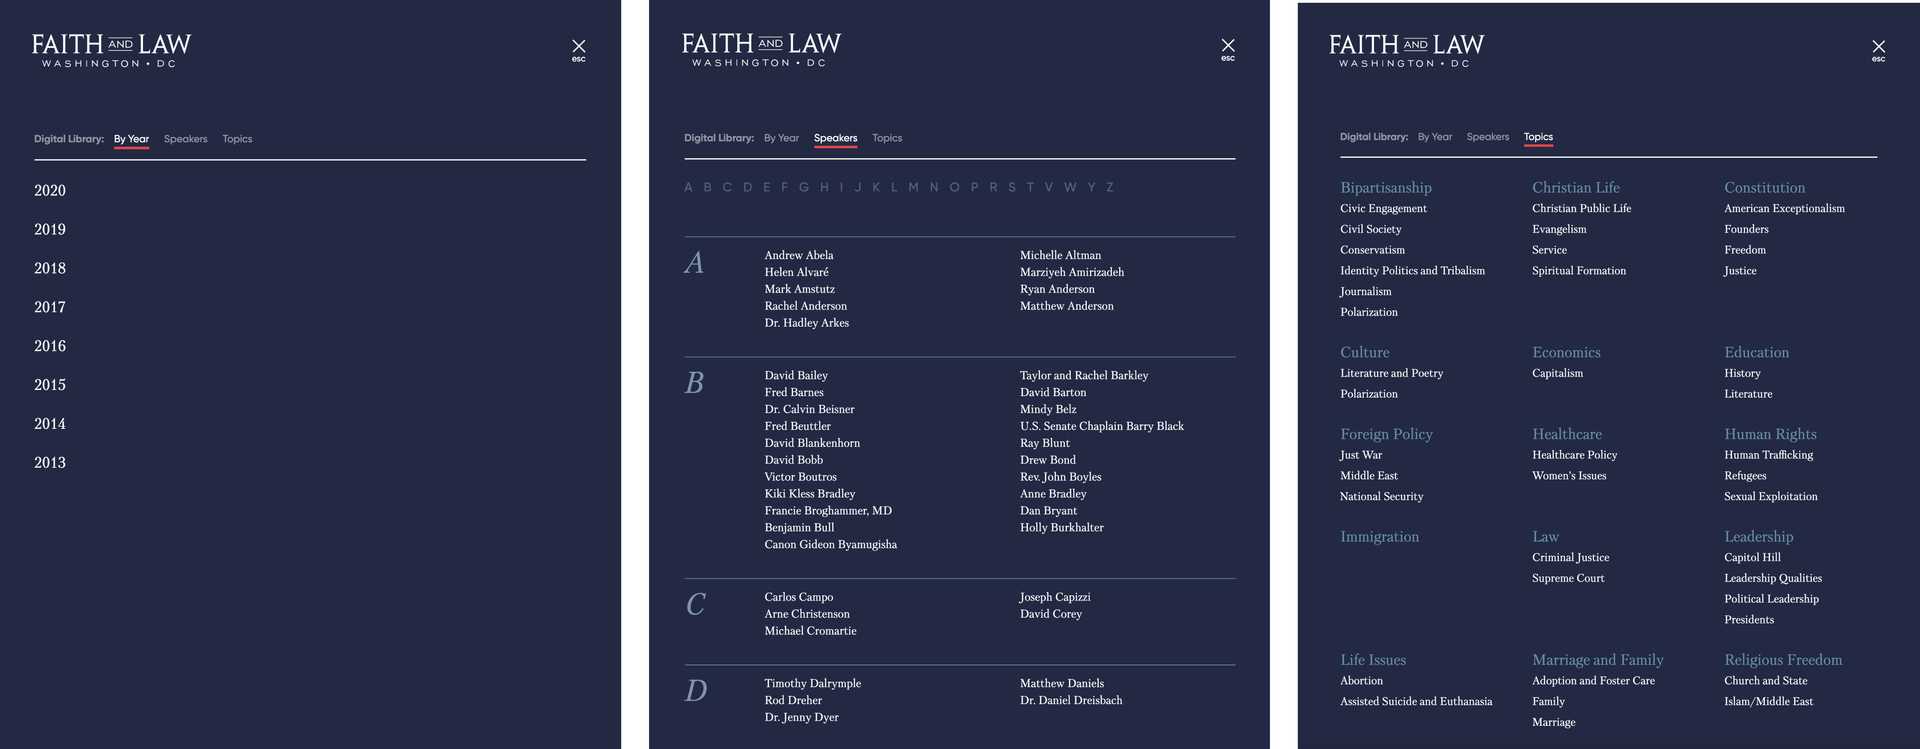 Search functionality on Faith & Law website